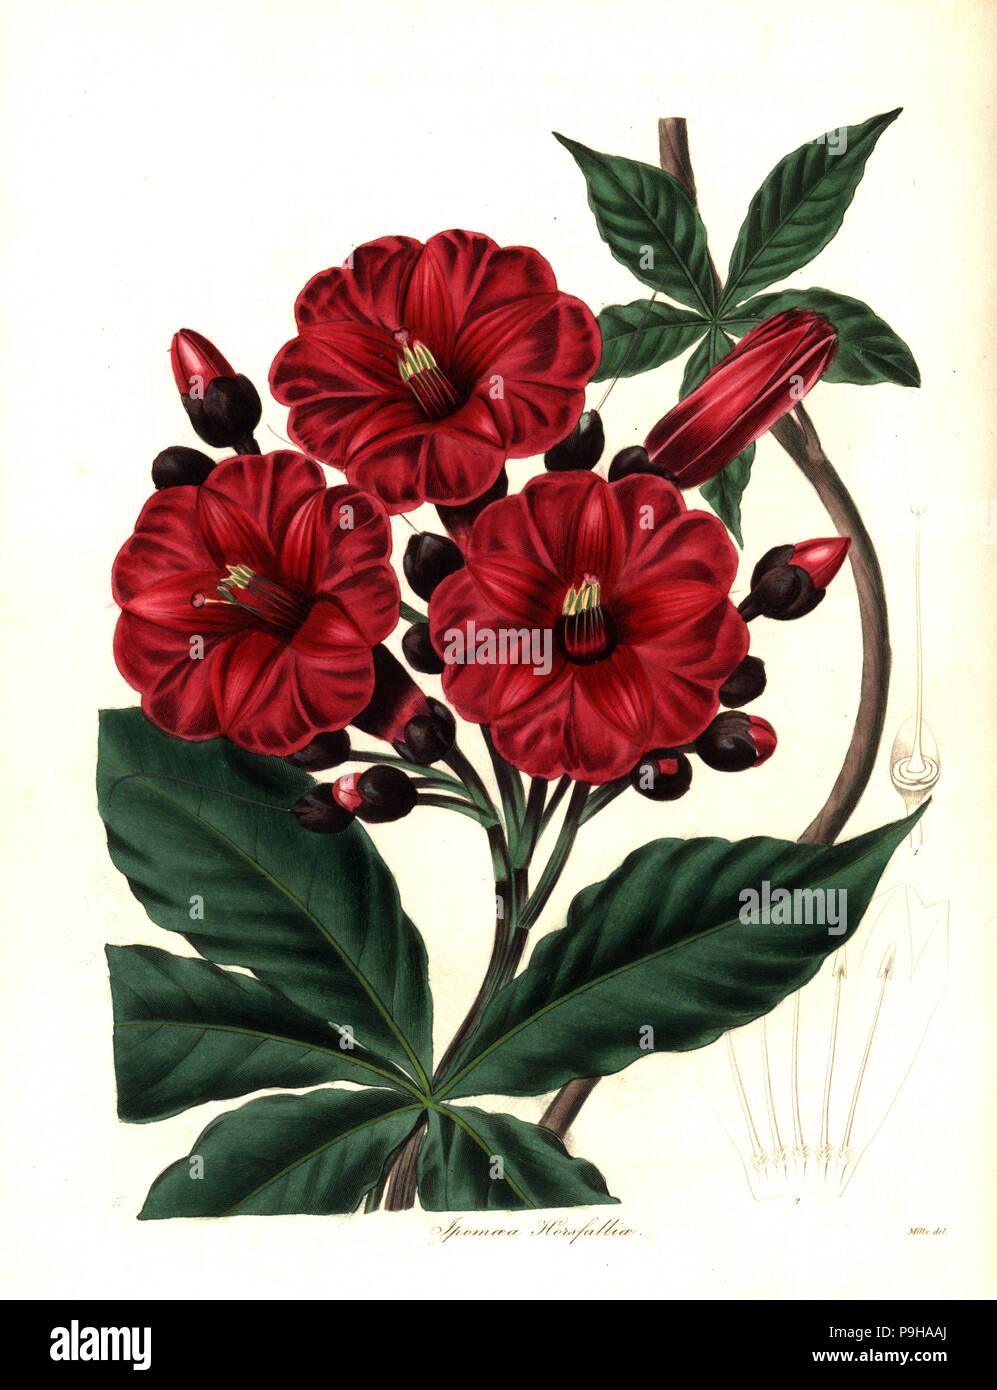 Mrs. Horsfall's ipomoea, Ipomoea horsfalliae. Handcoloured copperplate engraving after a botanical illustration by Mills from Benjamin Maund and the Rev. John Stevens Henslow's The Botanist, London, 1836. Stock Photo